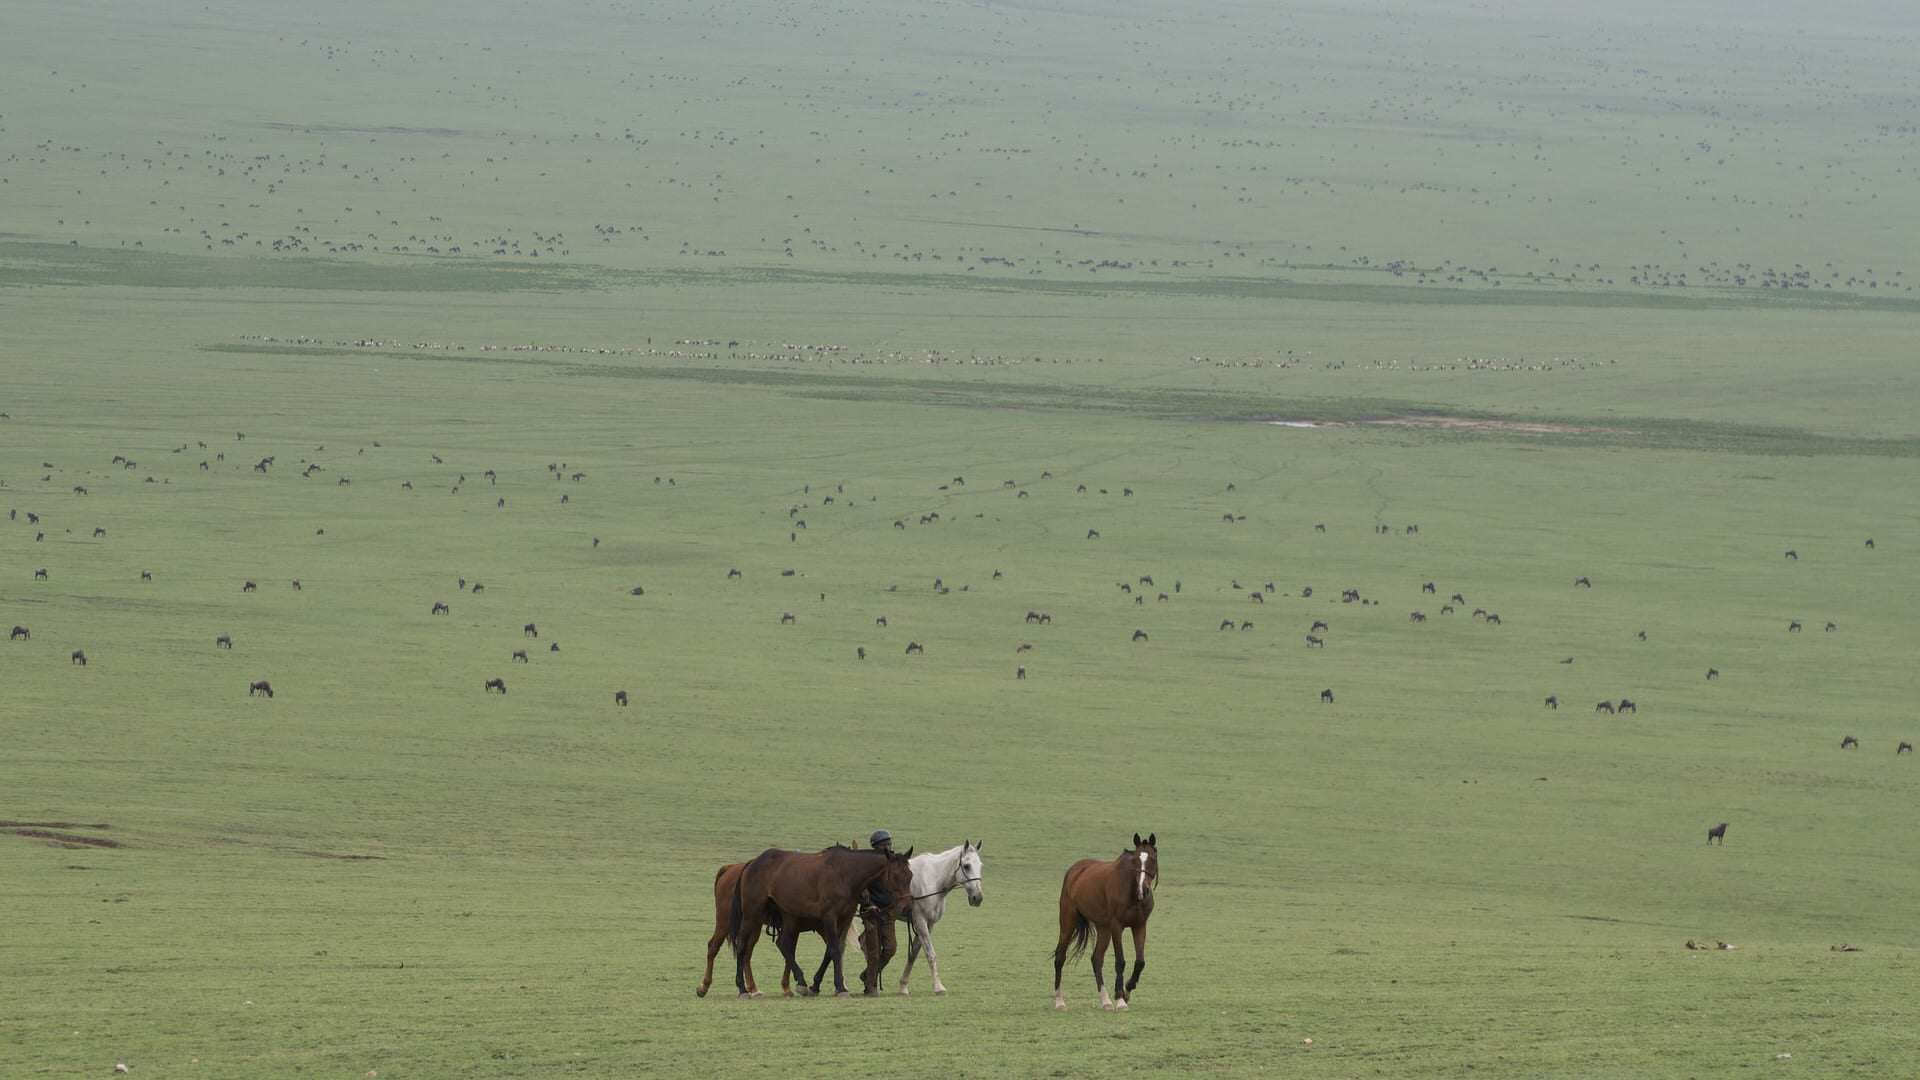 Groom leading 4 horses on endless plains covered by Wildebeest and cattle